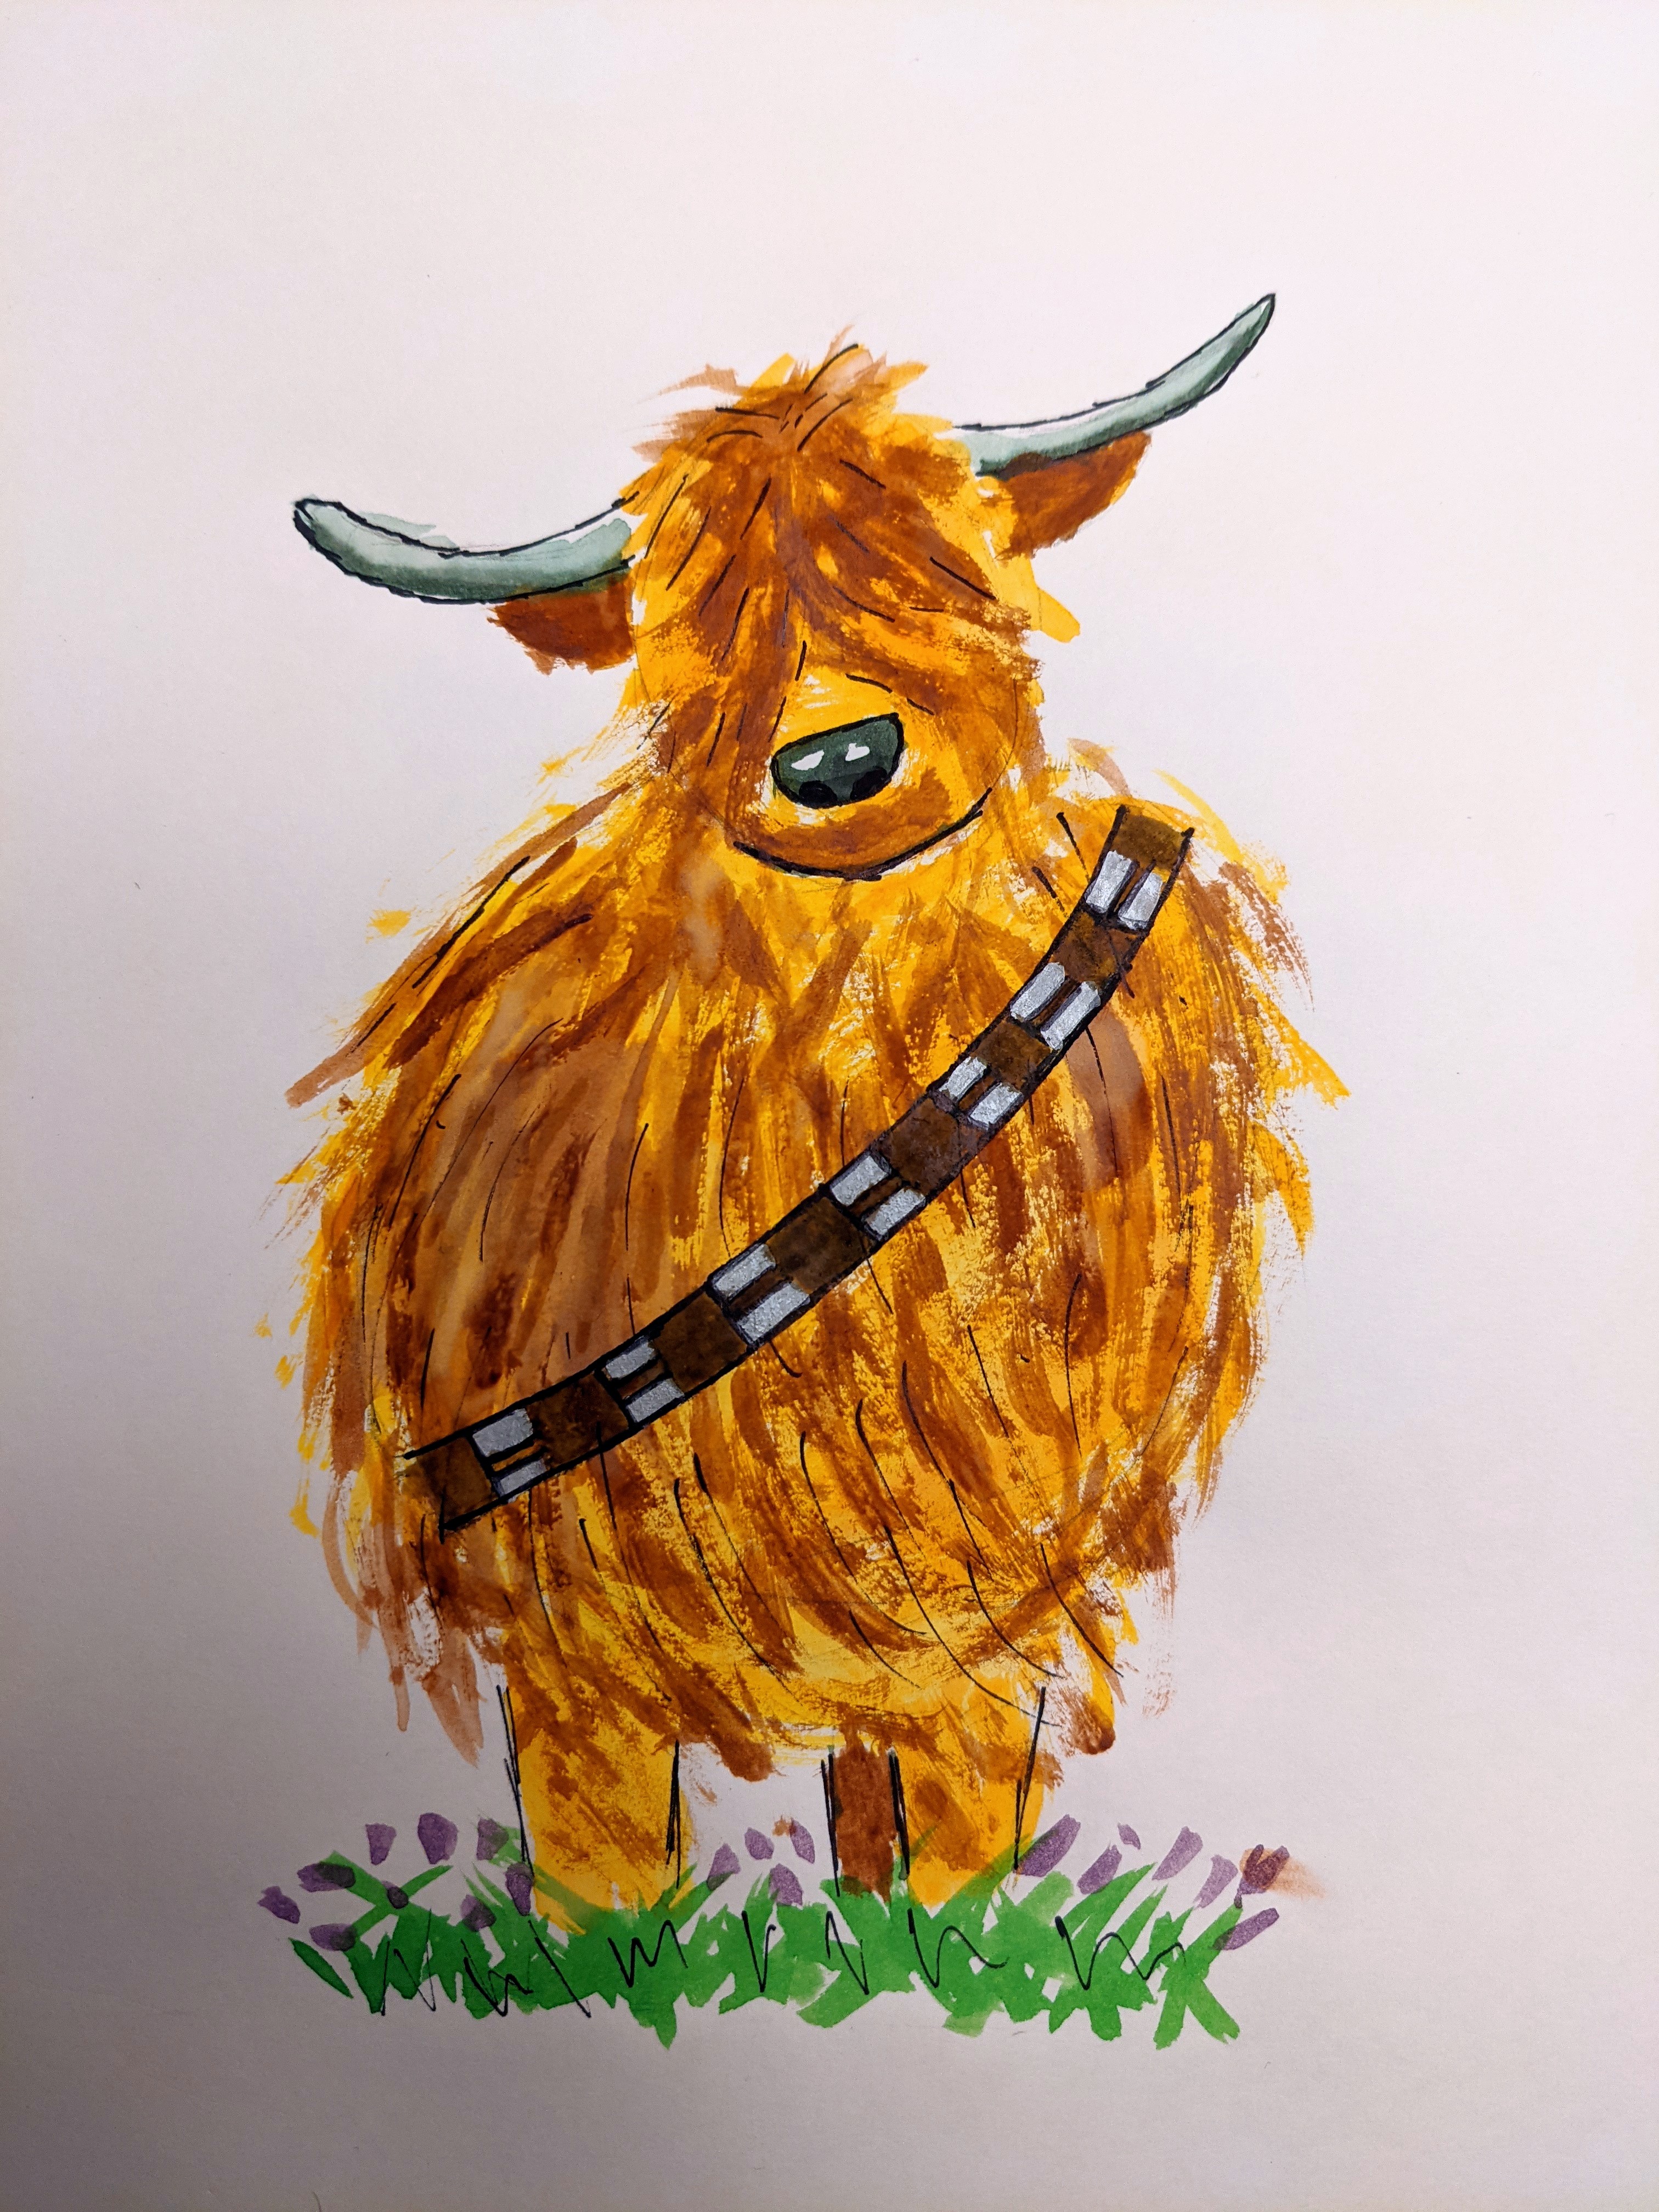 Watercolor drawing of a highland coo with characteristic shaggy fur and pointy horns with a bandolier across its body